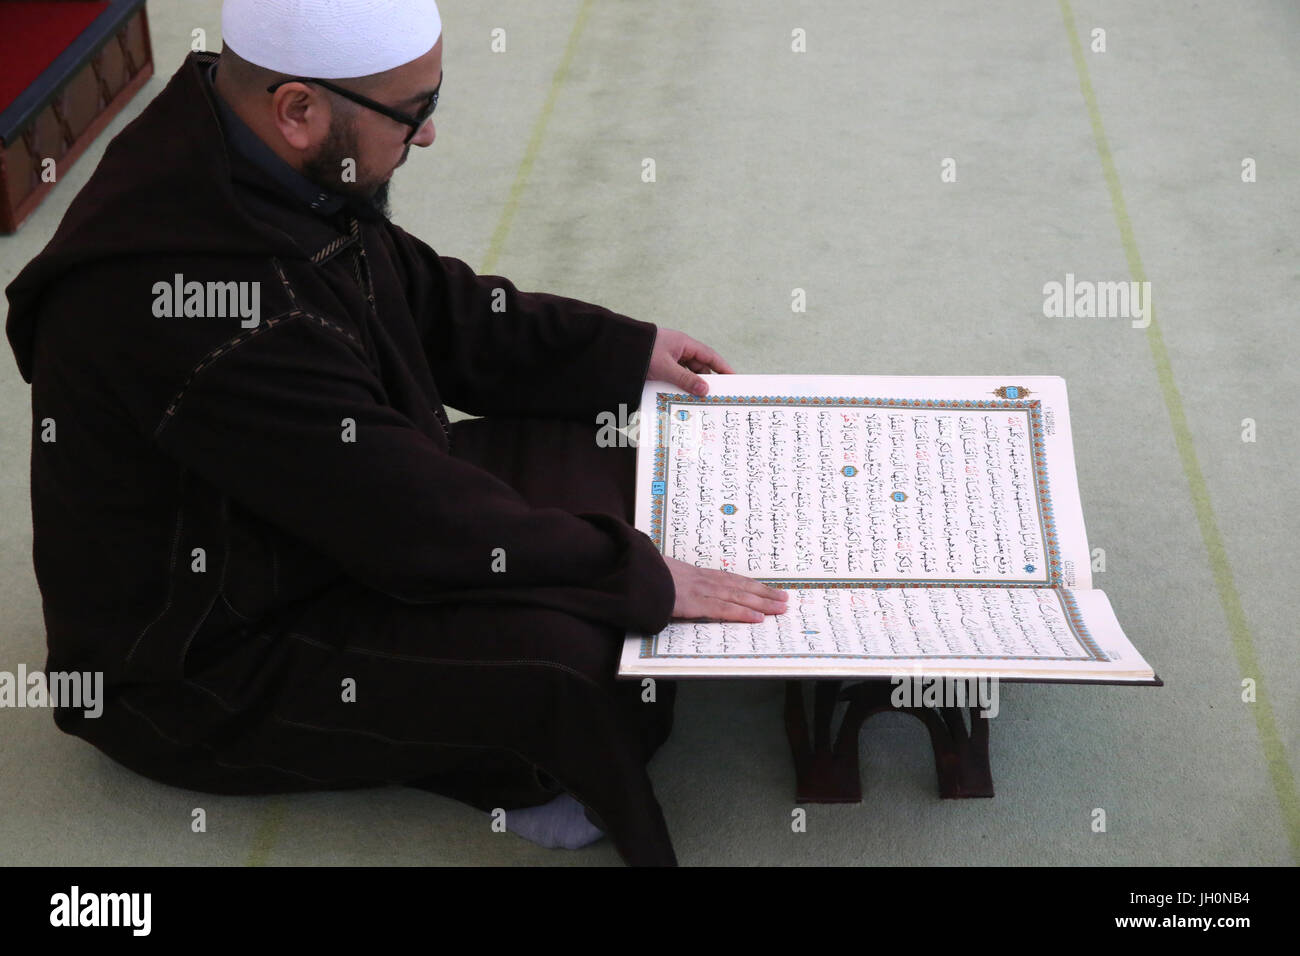 Imam reading the Quran in a mosque.  France. Stock Photo